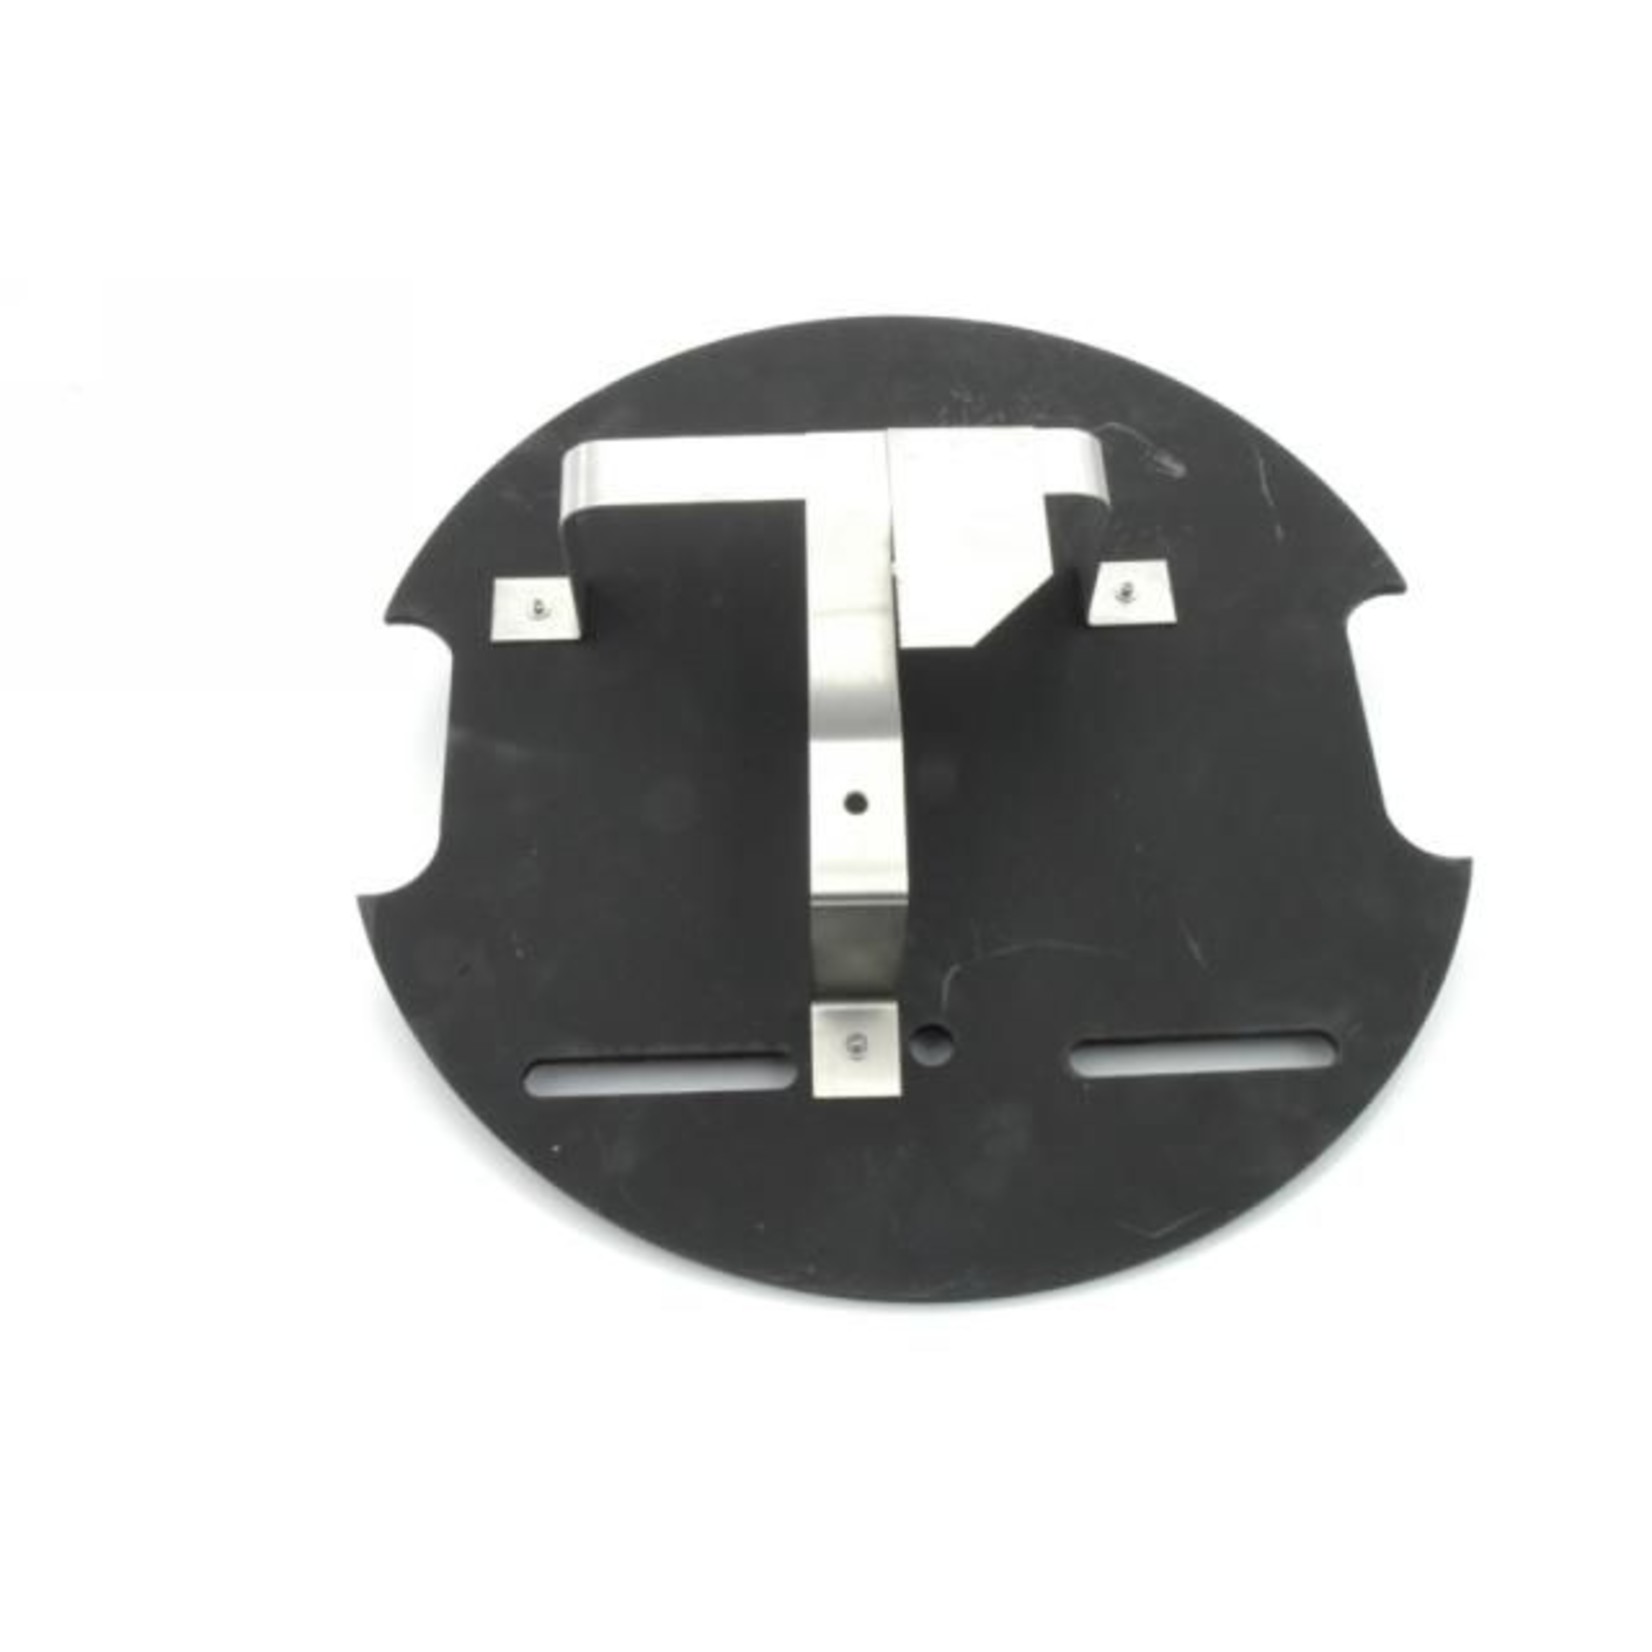 Plate with support spare tyre Nr Org: DX625150A